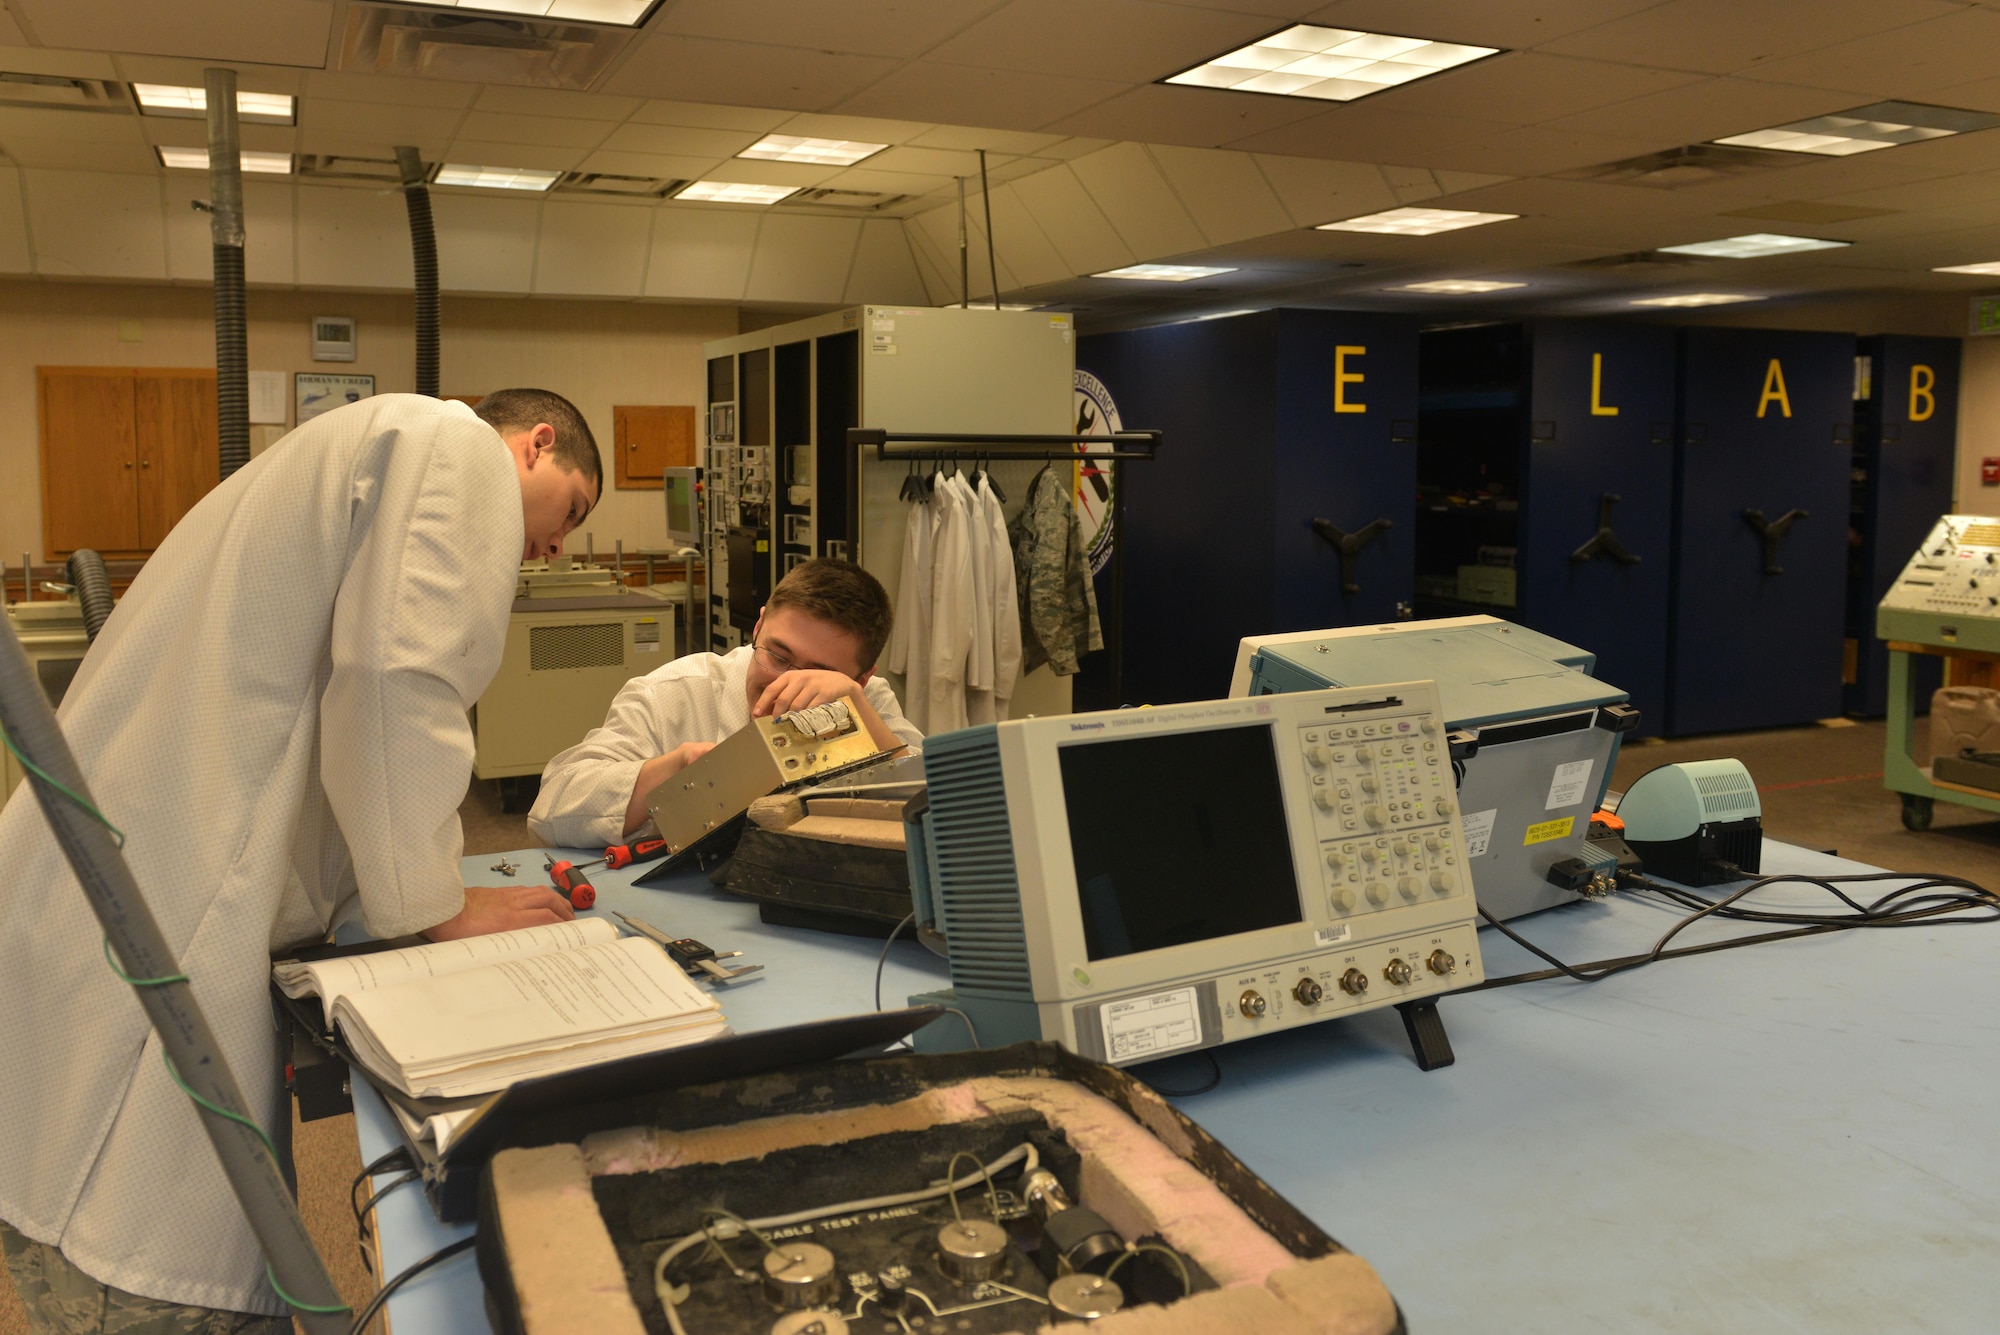 (From left) Staff Sgt. Dylan Wood, 791st Maintenance Squadron electronics laboratory trainer, and Senior Airman Maxwell Clement, 791st MXS ELAB technician, remove faulty components from a controller monitor at Minot Air Force Base, N.D., March 2, 2017. Electronic laboratory technicians are responsible for maintenance and quality assurance of the Minuteman III Intercontinental Ballistic Missile support equipment. (U.S. Air Force photo/Airman 1st Class Jessica Weissman)